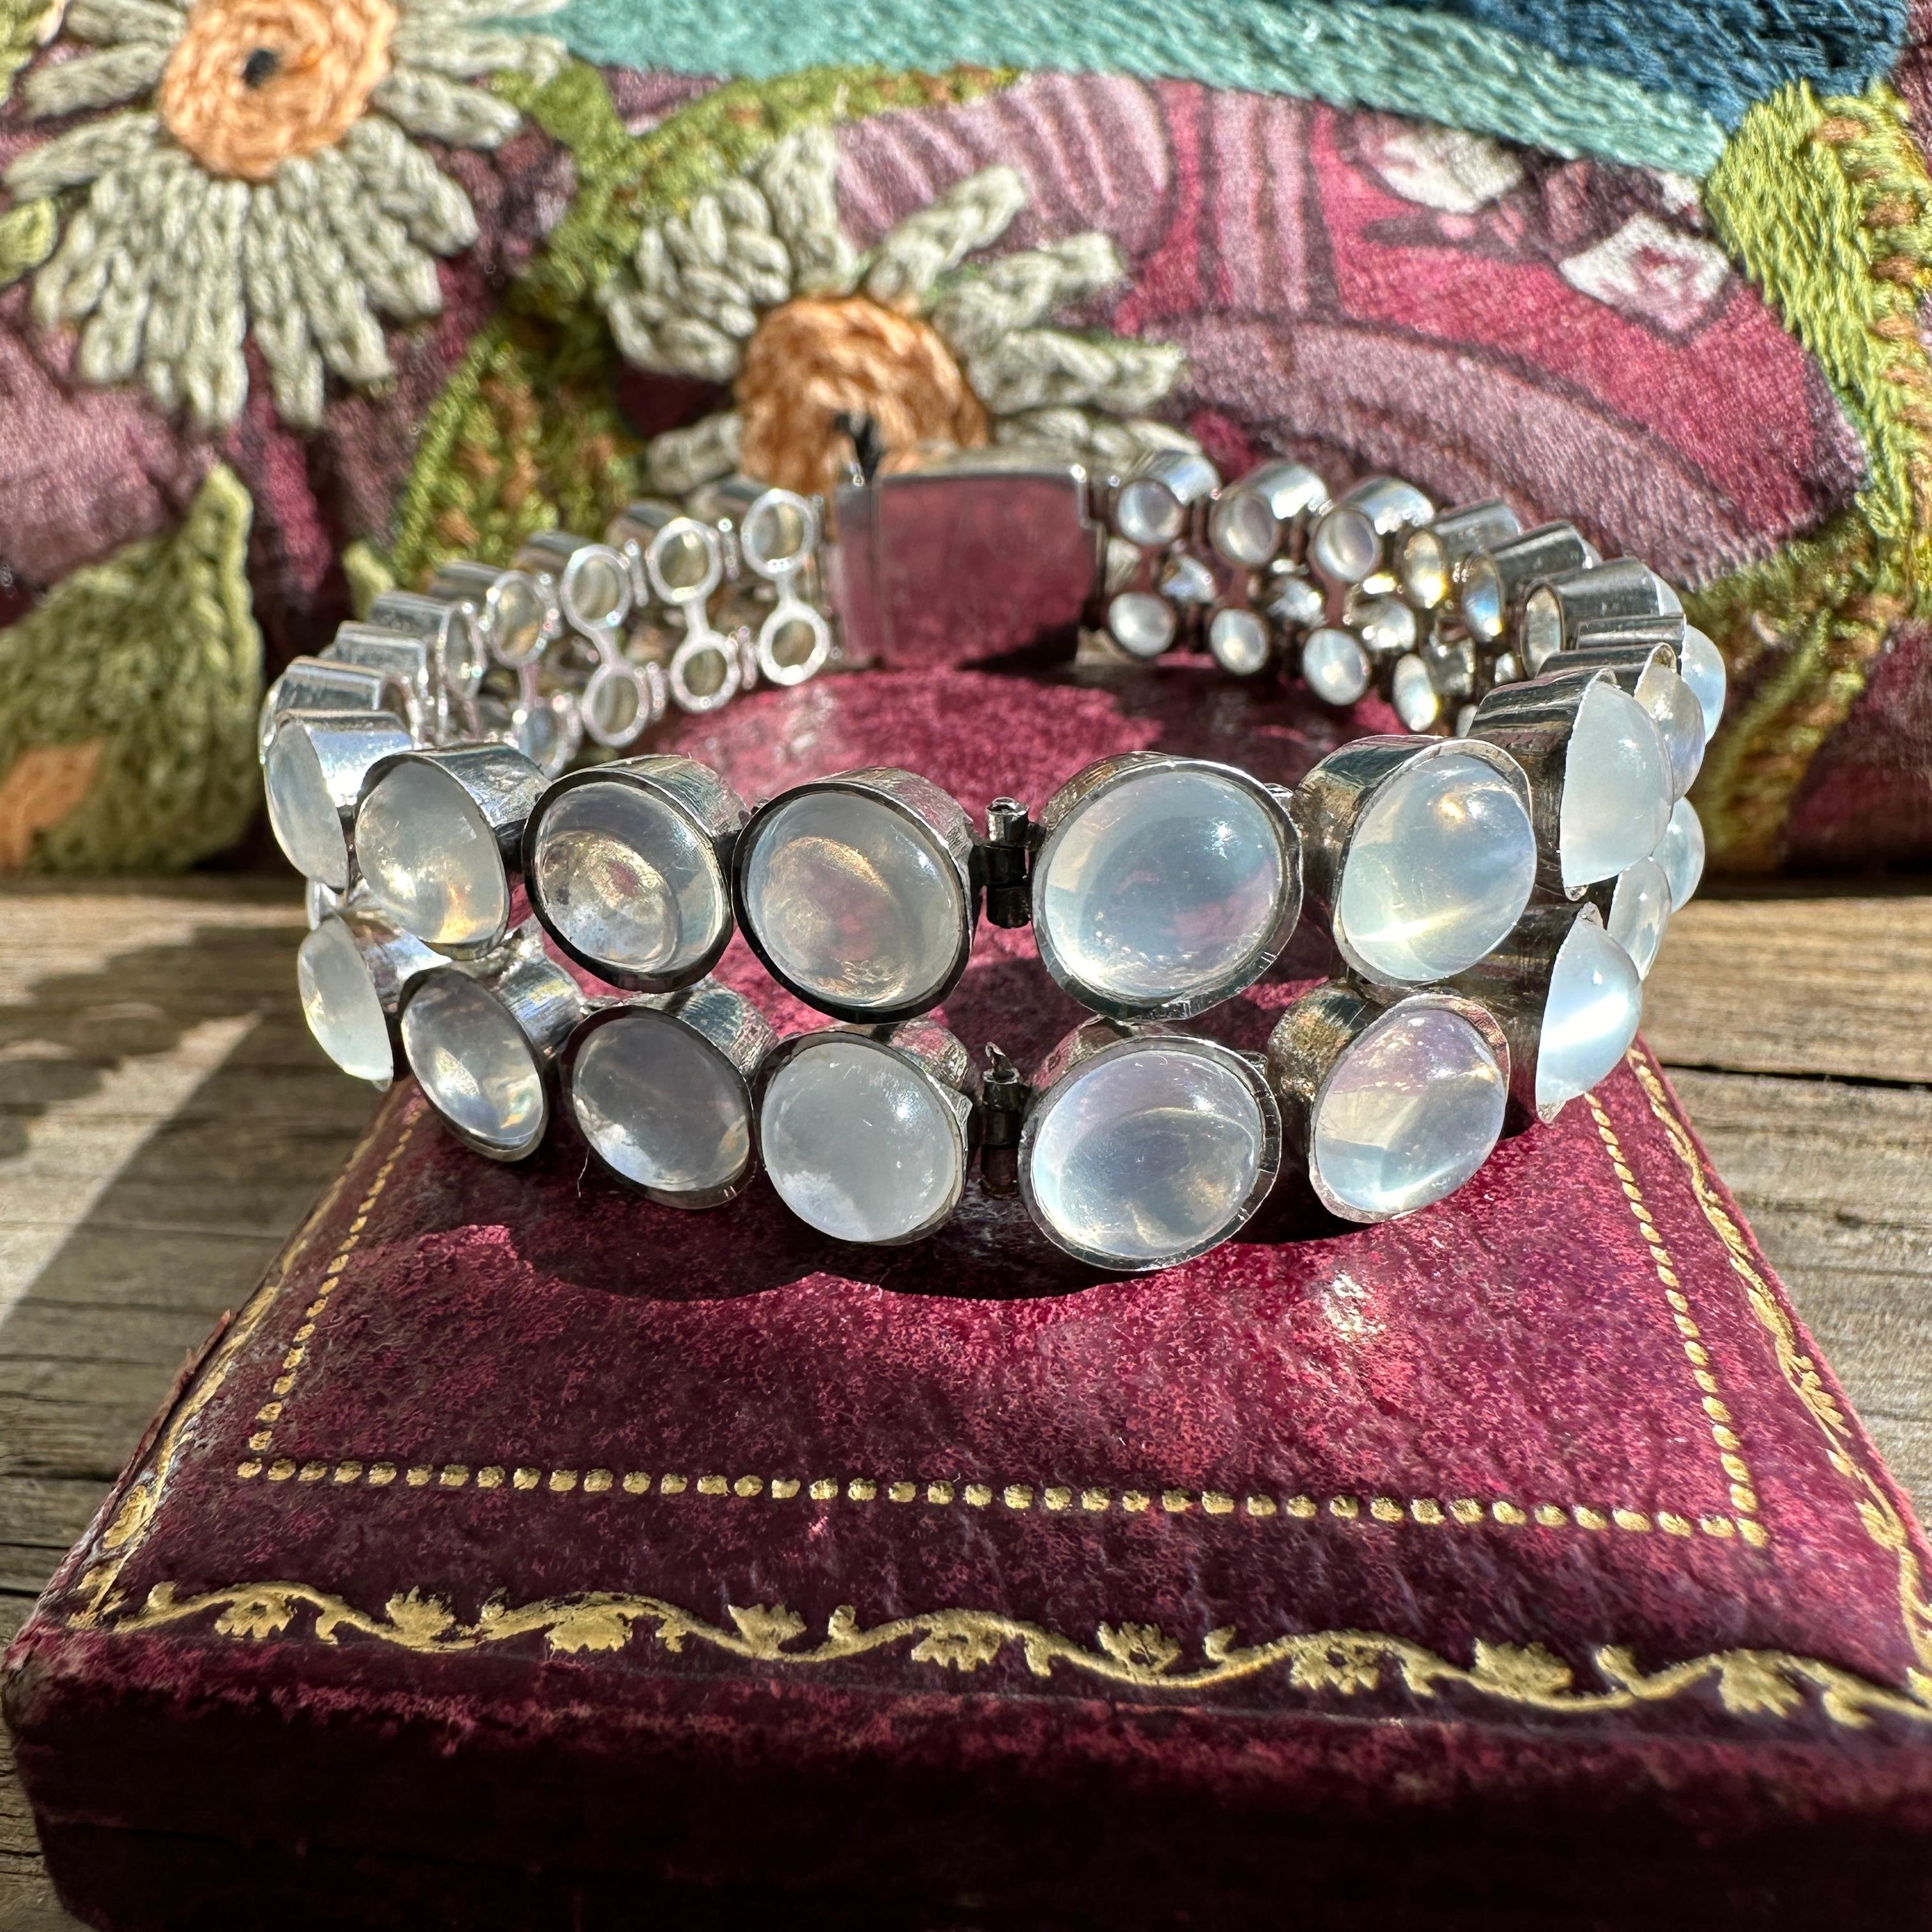 Details:
Do you love patterns, and specifically dots? We have a fabulous vintage moonstone dot and sterling silver bracelet! This is a lovely classic style piece that has a very nice weight to it, and will always be in style! Loving this one right